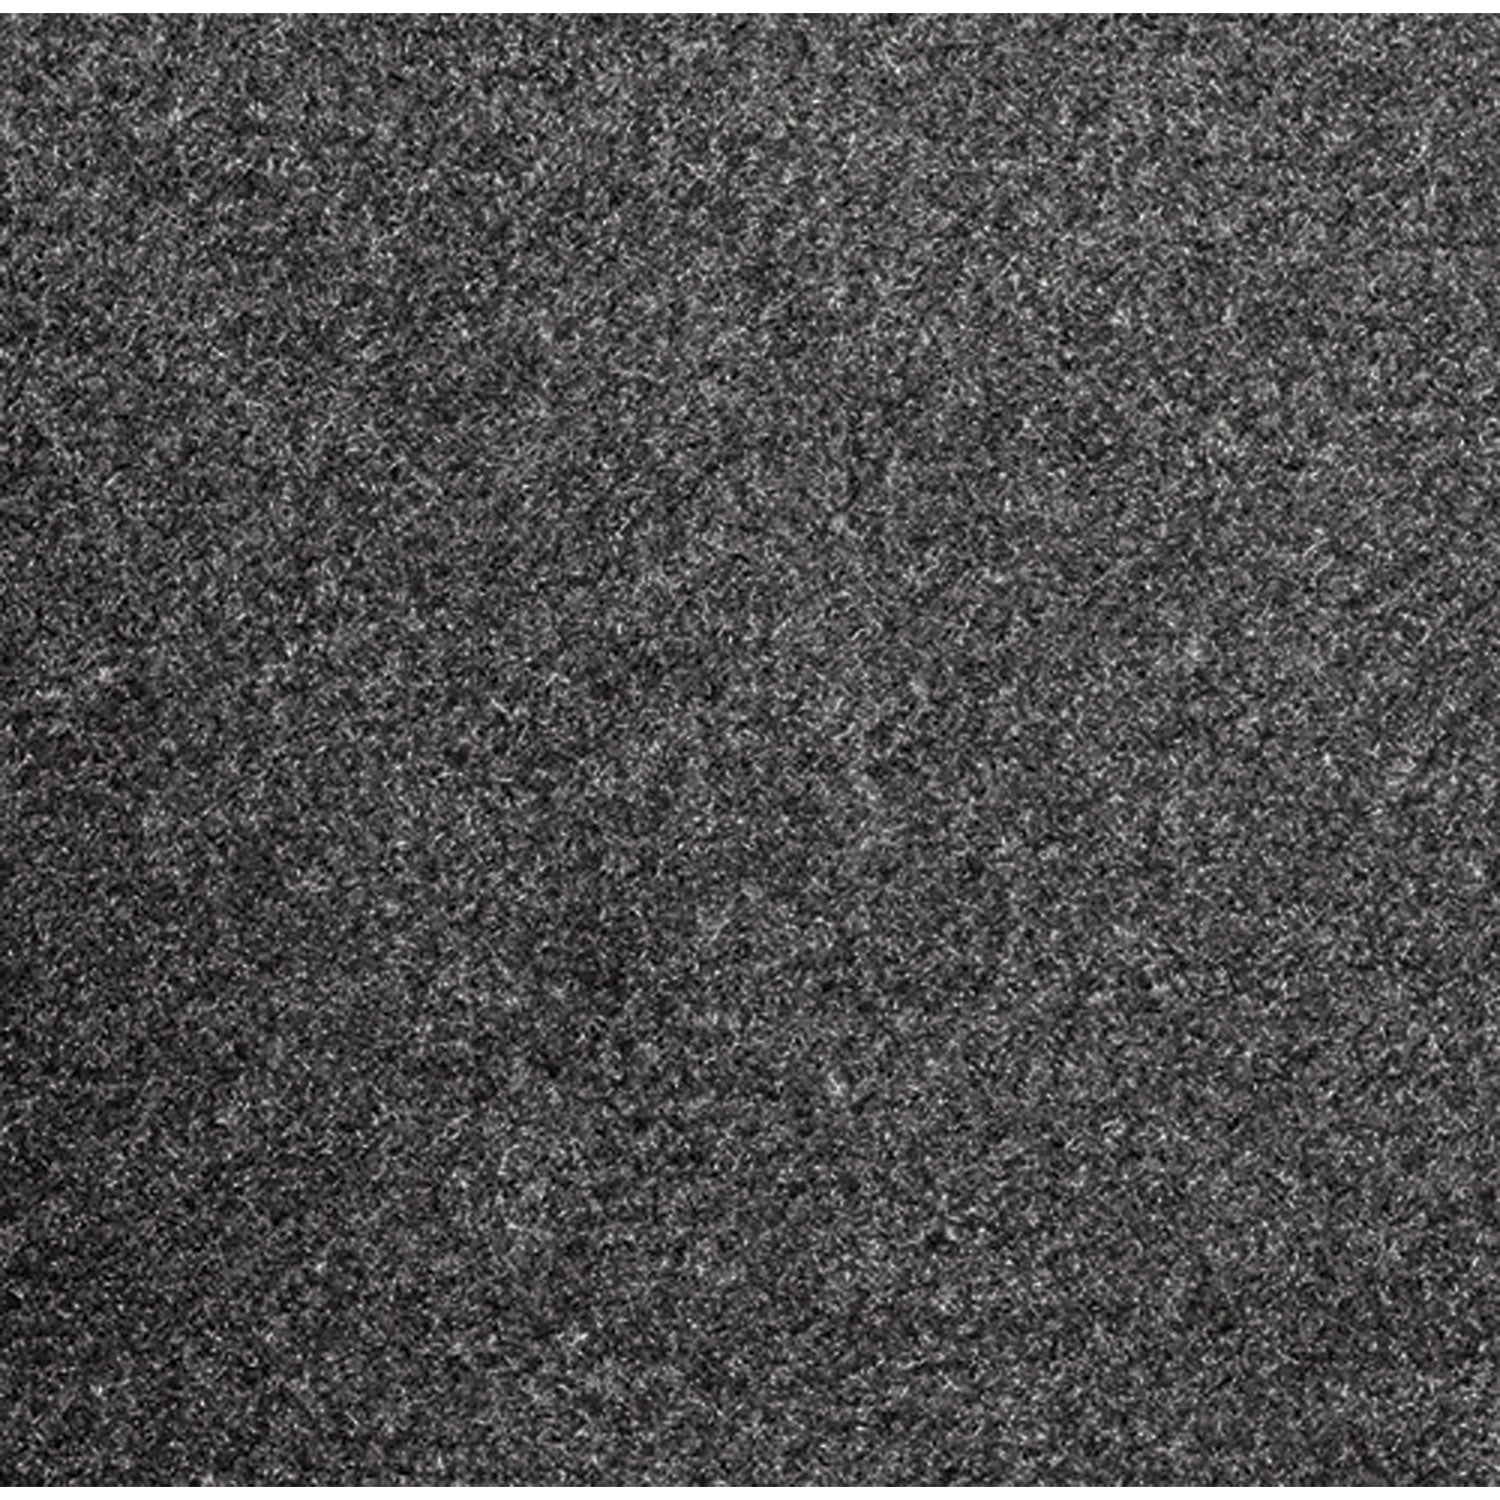 Rely-On Olefin Indoor Wiper Mat, 48 x 72, Charcoal - 4